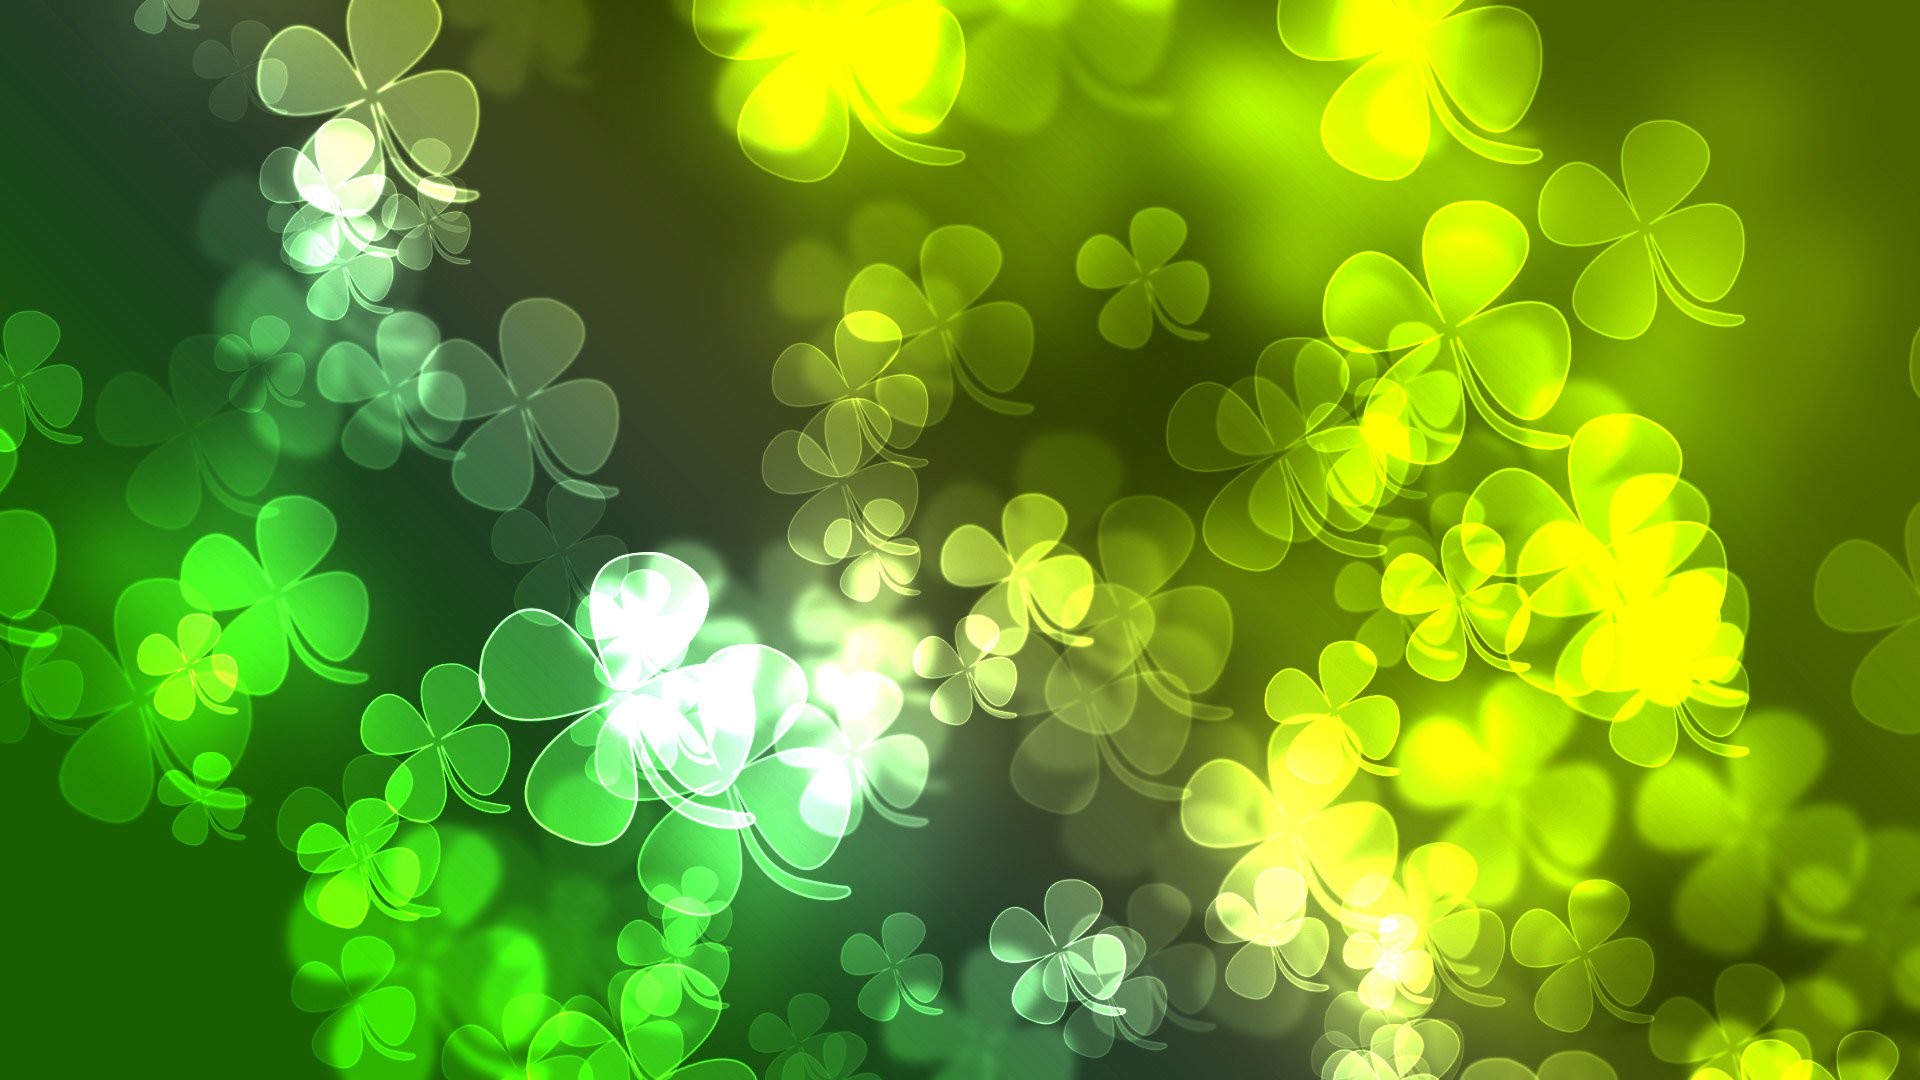 1920x1080 23 St. Patrick's Day themed wallpapers for your Android